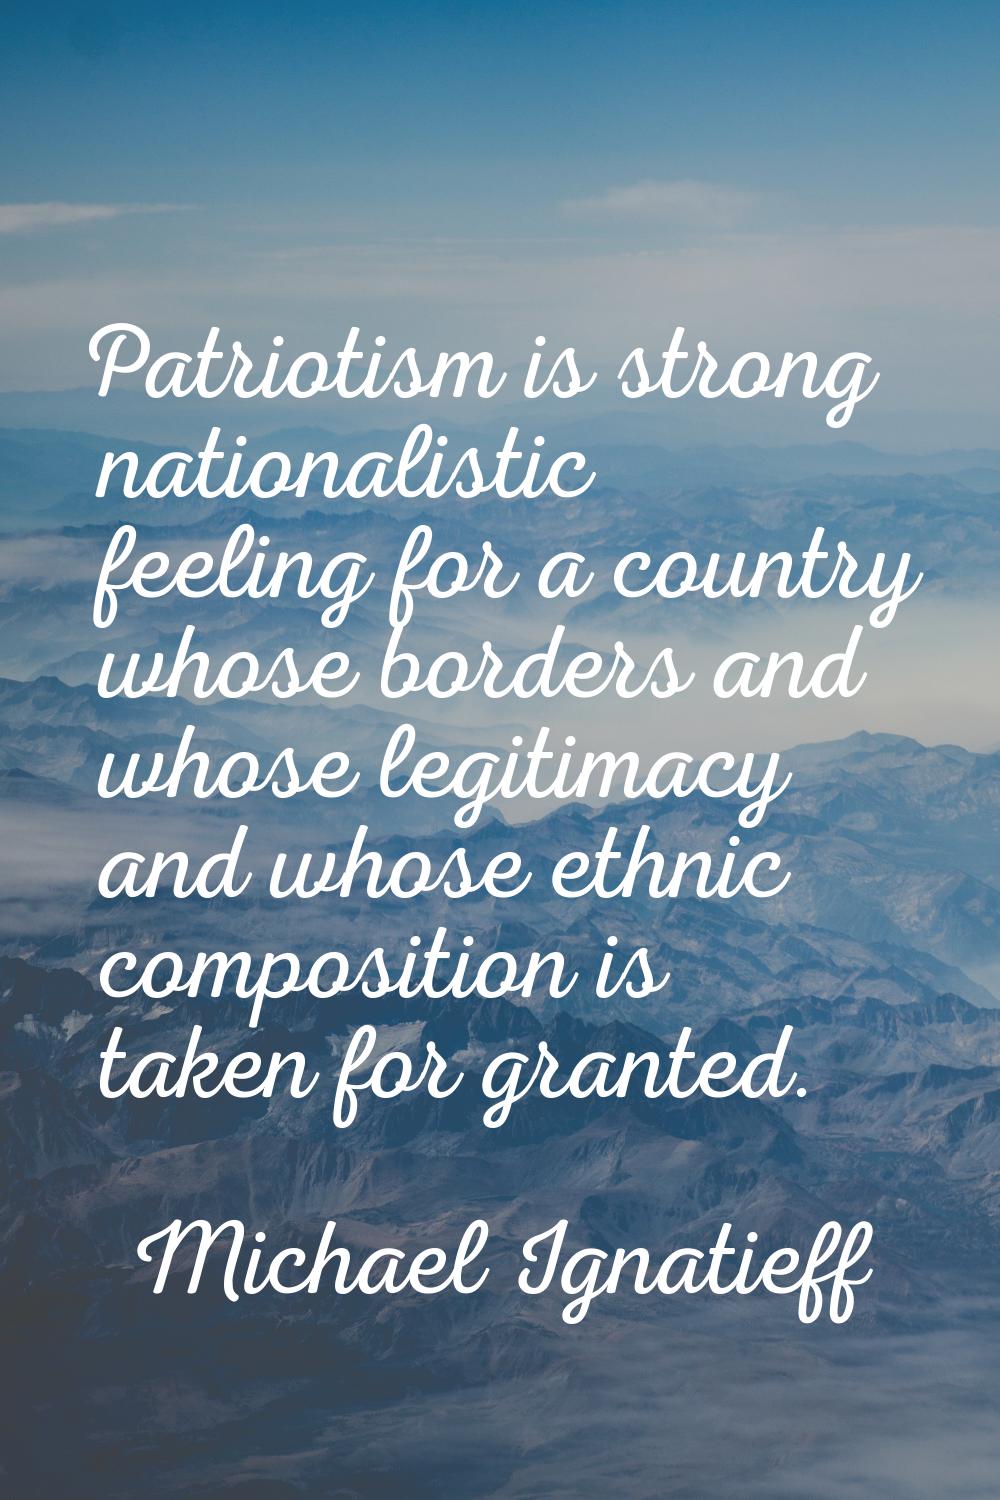 Patriotism is strong nationalistic feeling for a country whose borders and whose legitimacy and who